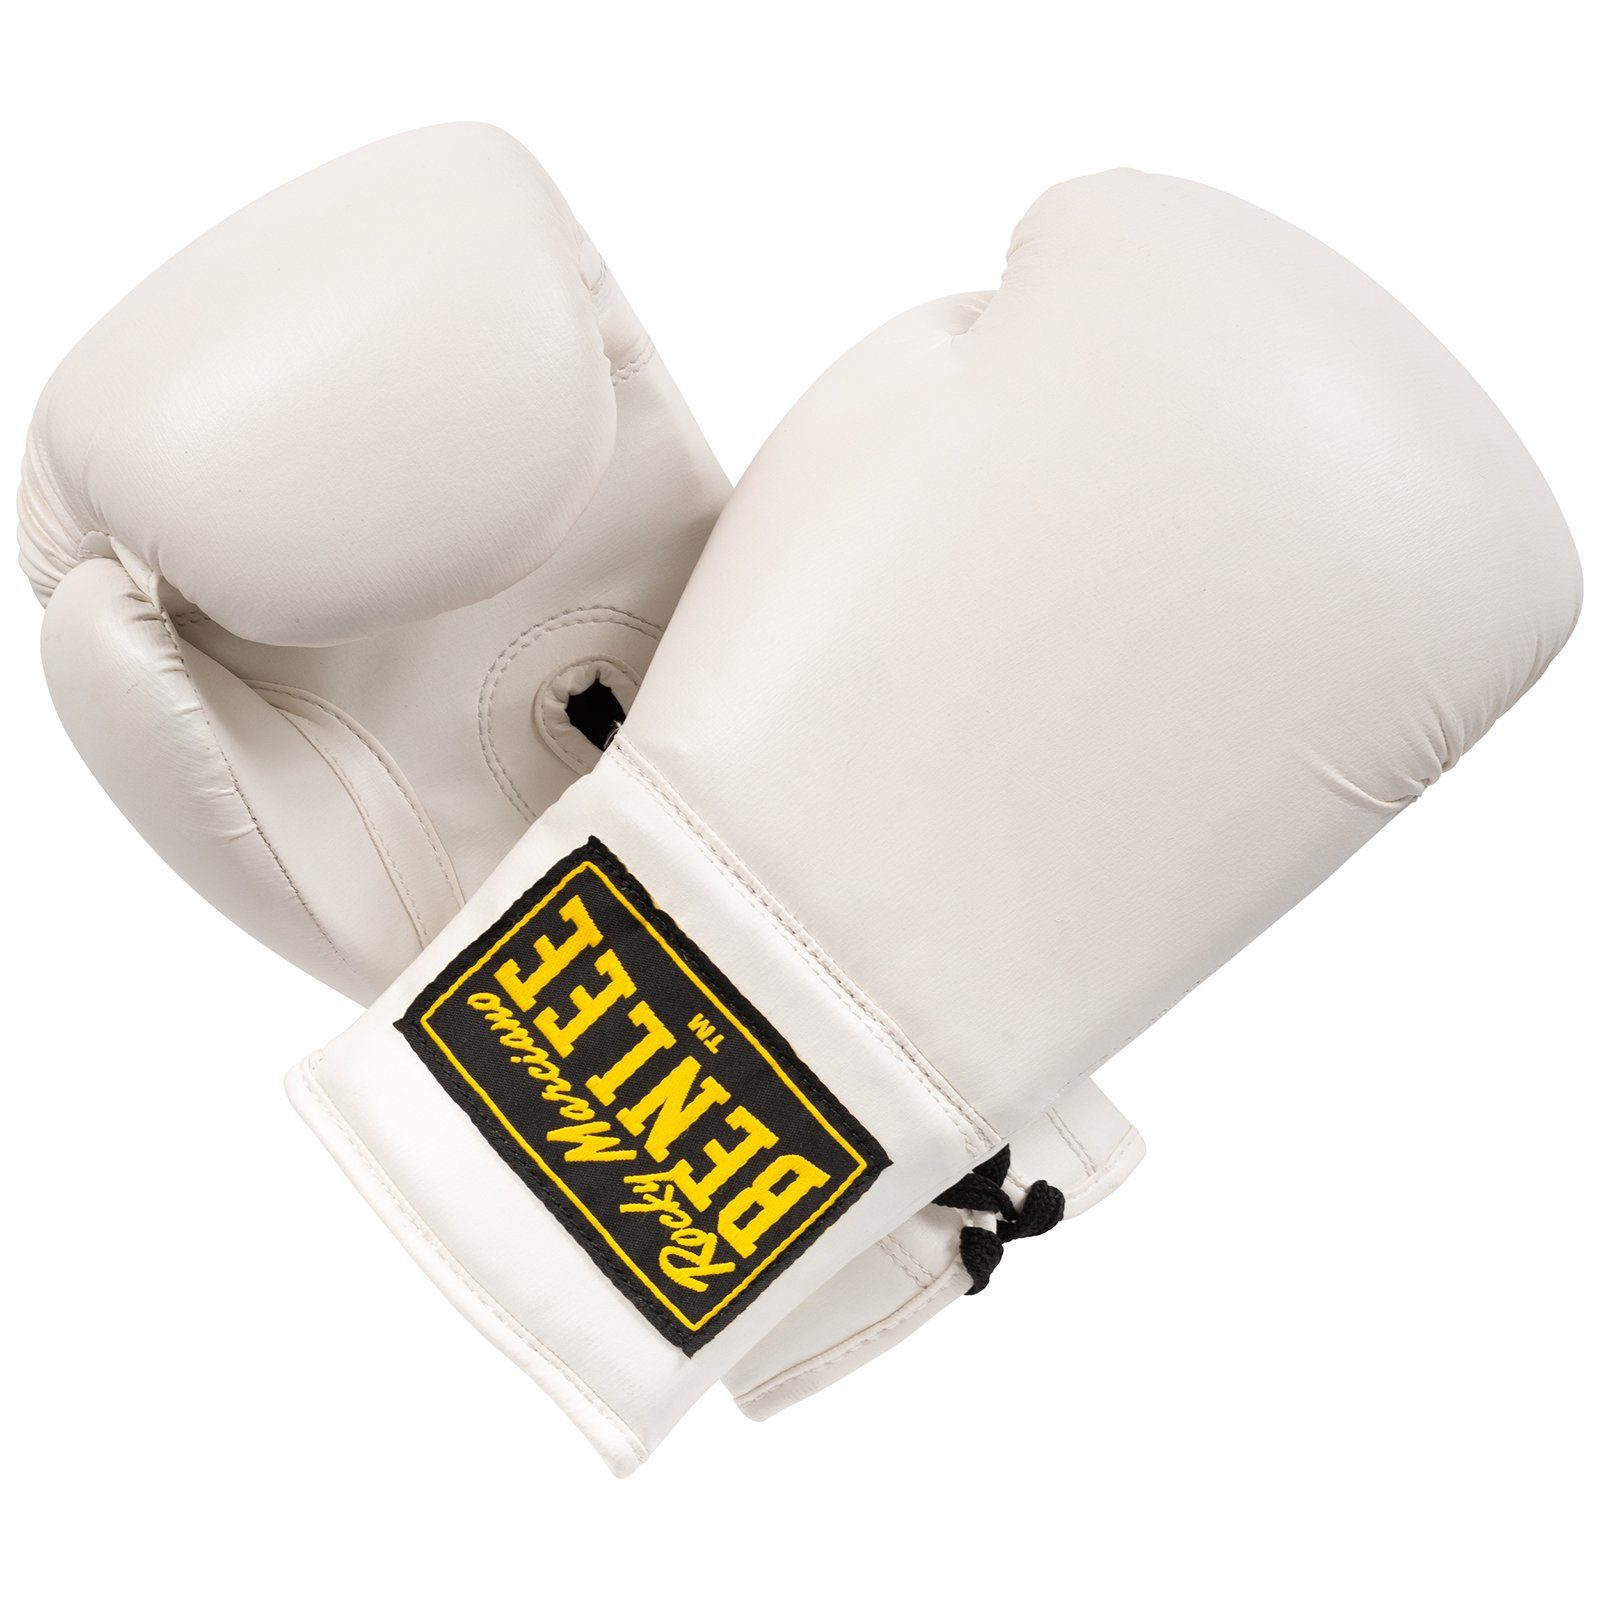 Benlee Rocky Marciano GLOVES White AUTOGRAPH Boxhandschuhe